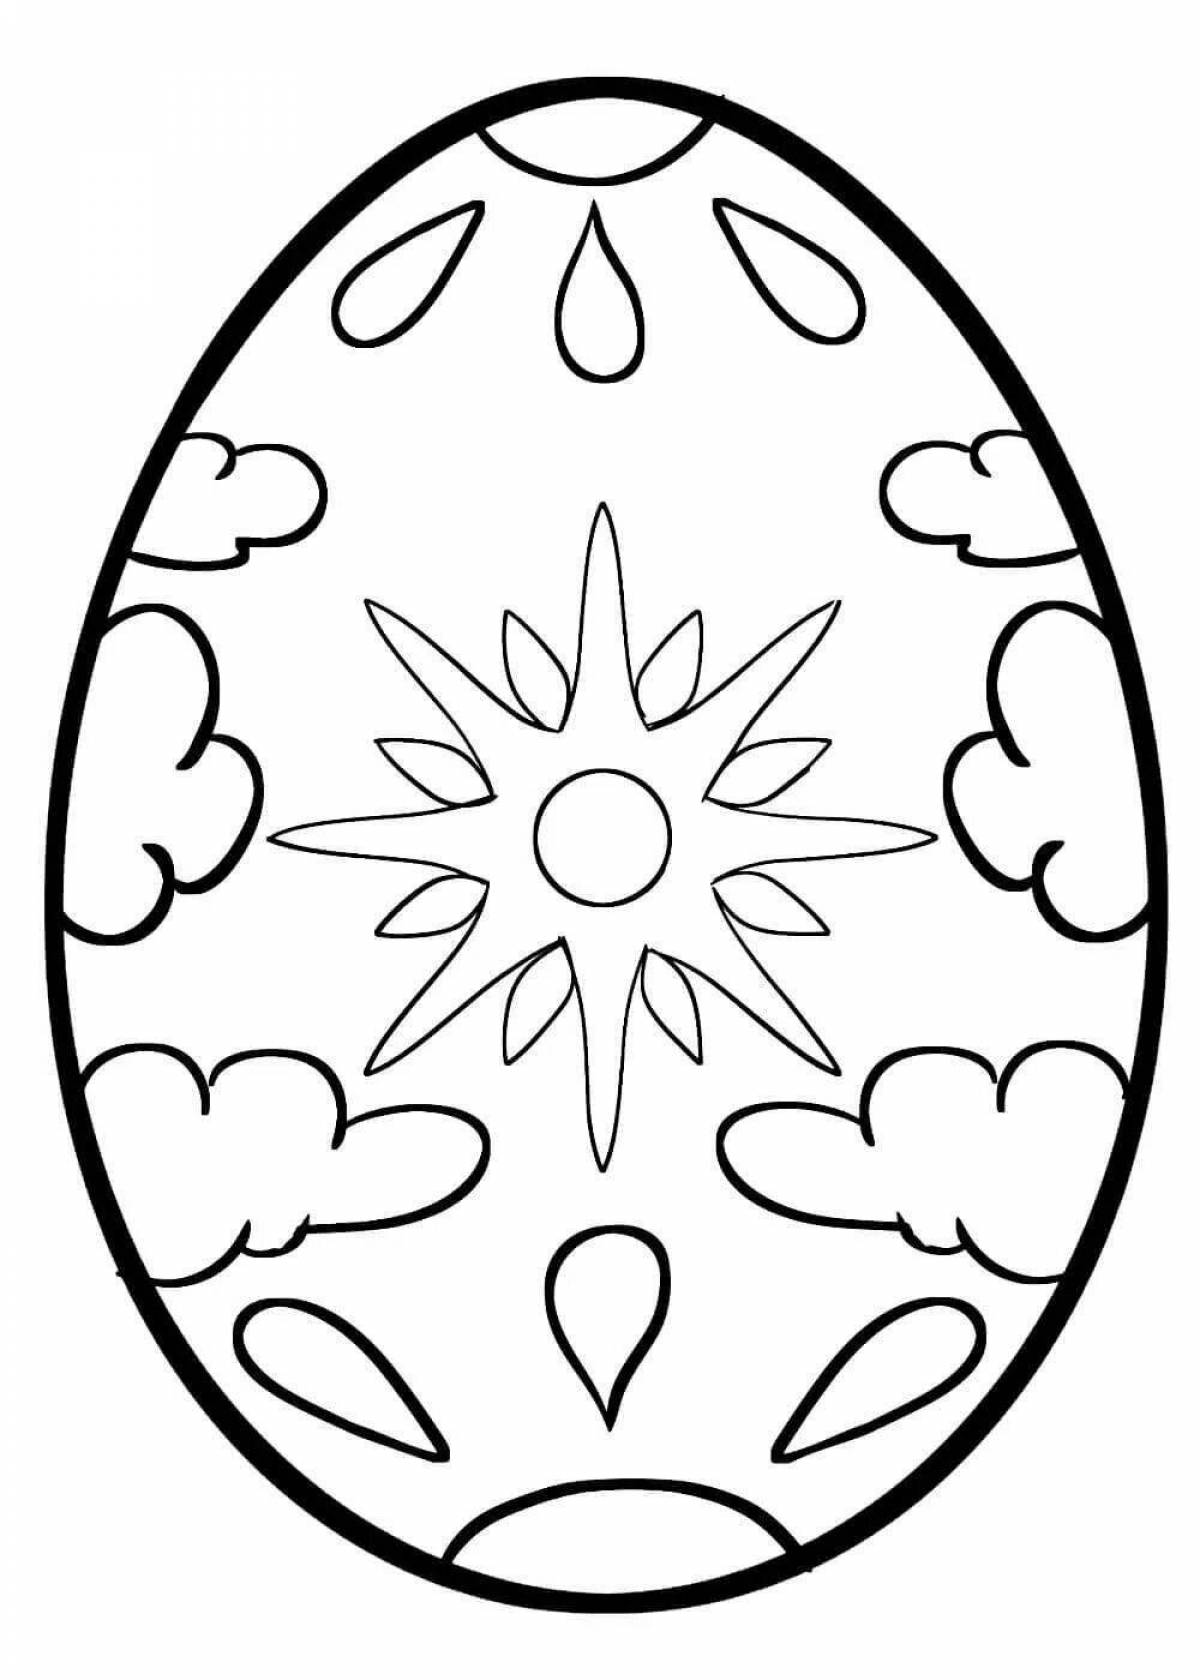 Colorful eggs coloring page